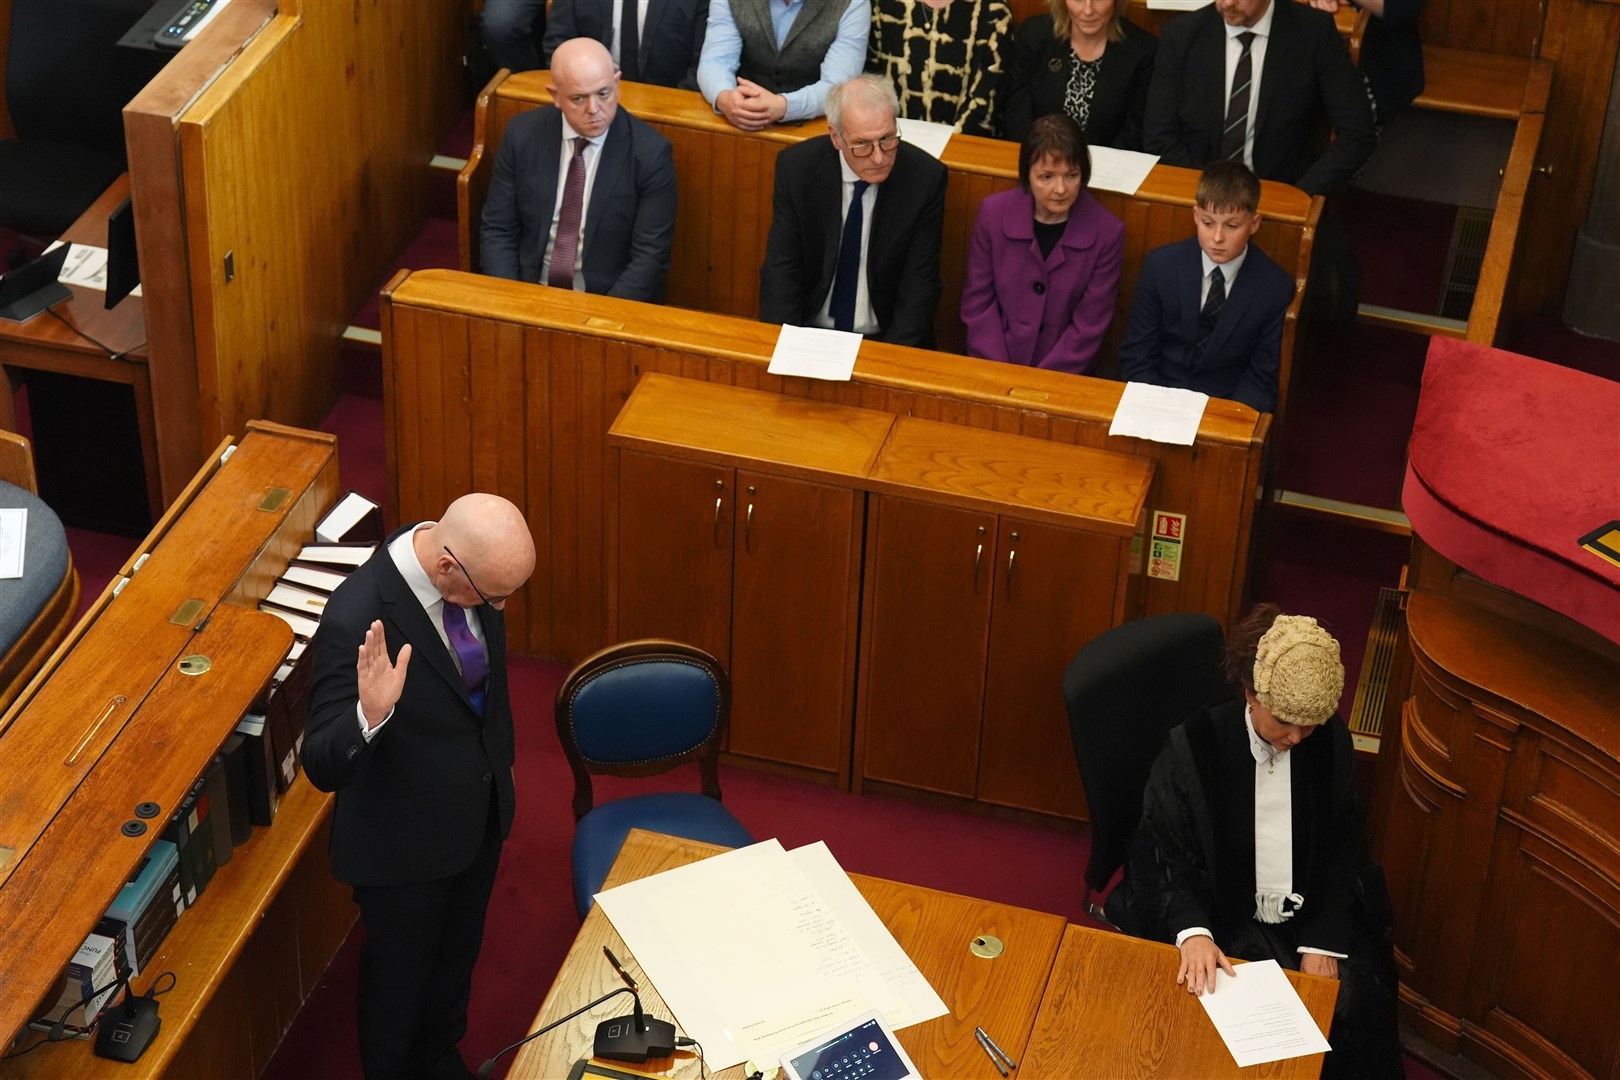 John Swinney, left, took the oath while his family watched on (Andrew Milligan/PA)